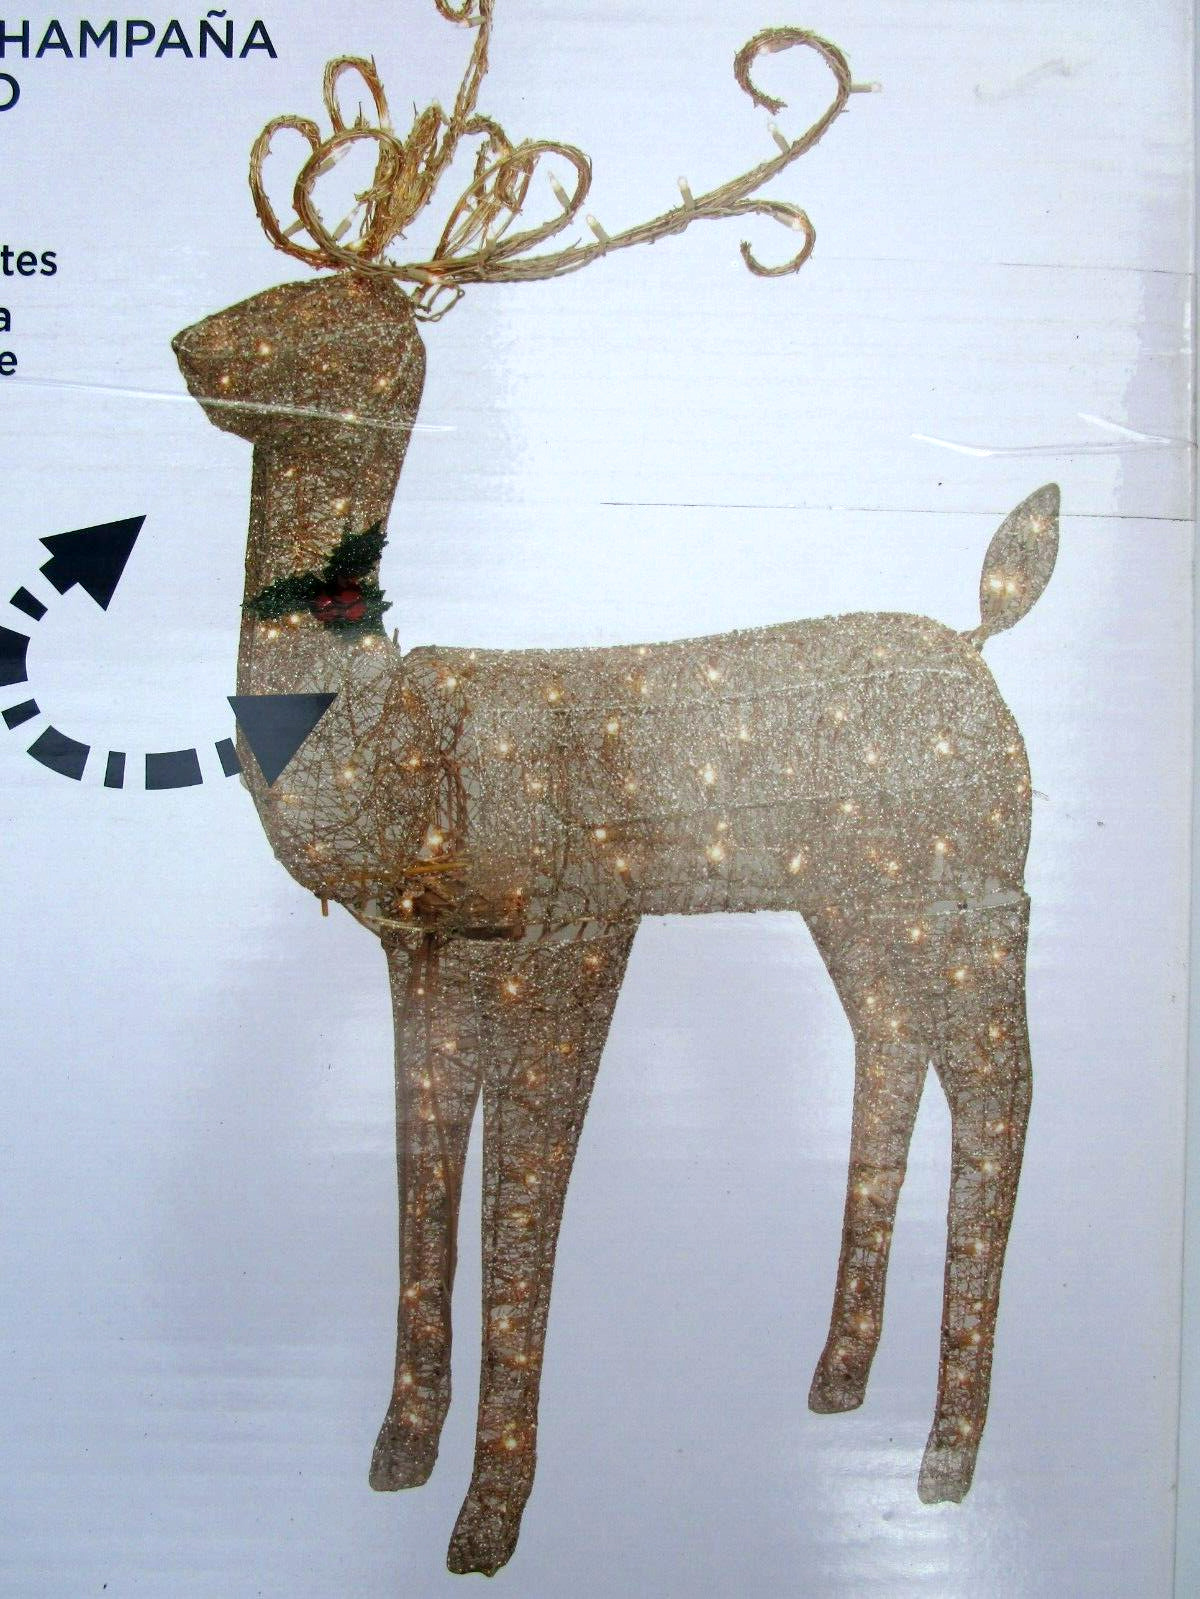 CELEBRATE IT BRIGHT TIDINGS ANIMATED GLITTERING 52in CHAMPAGNE STANDING BUCK